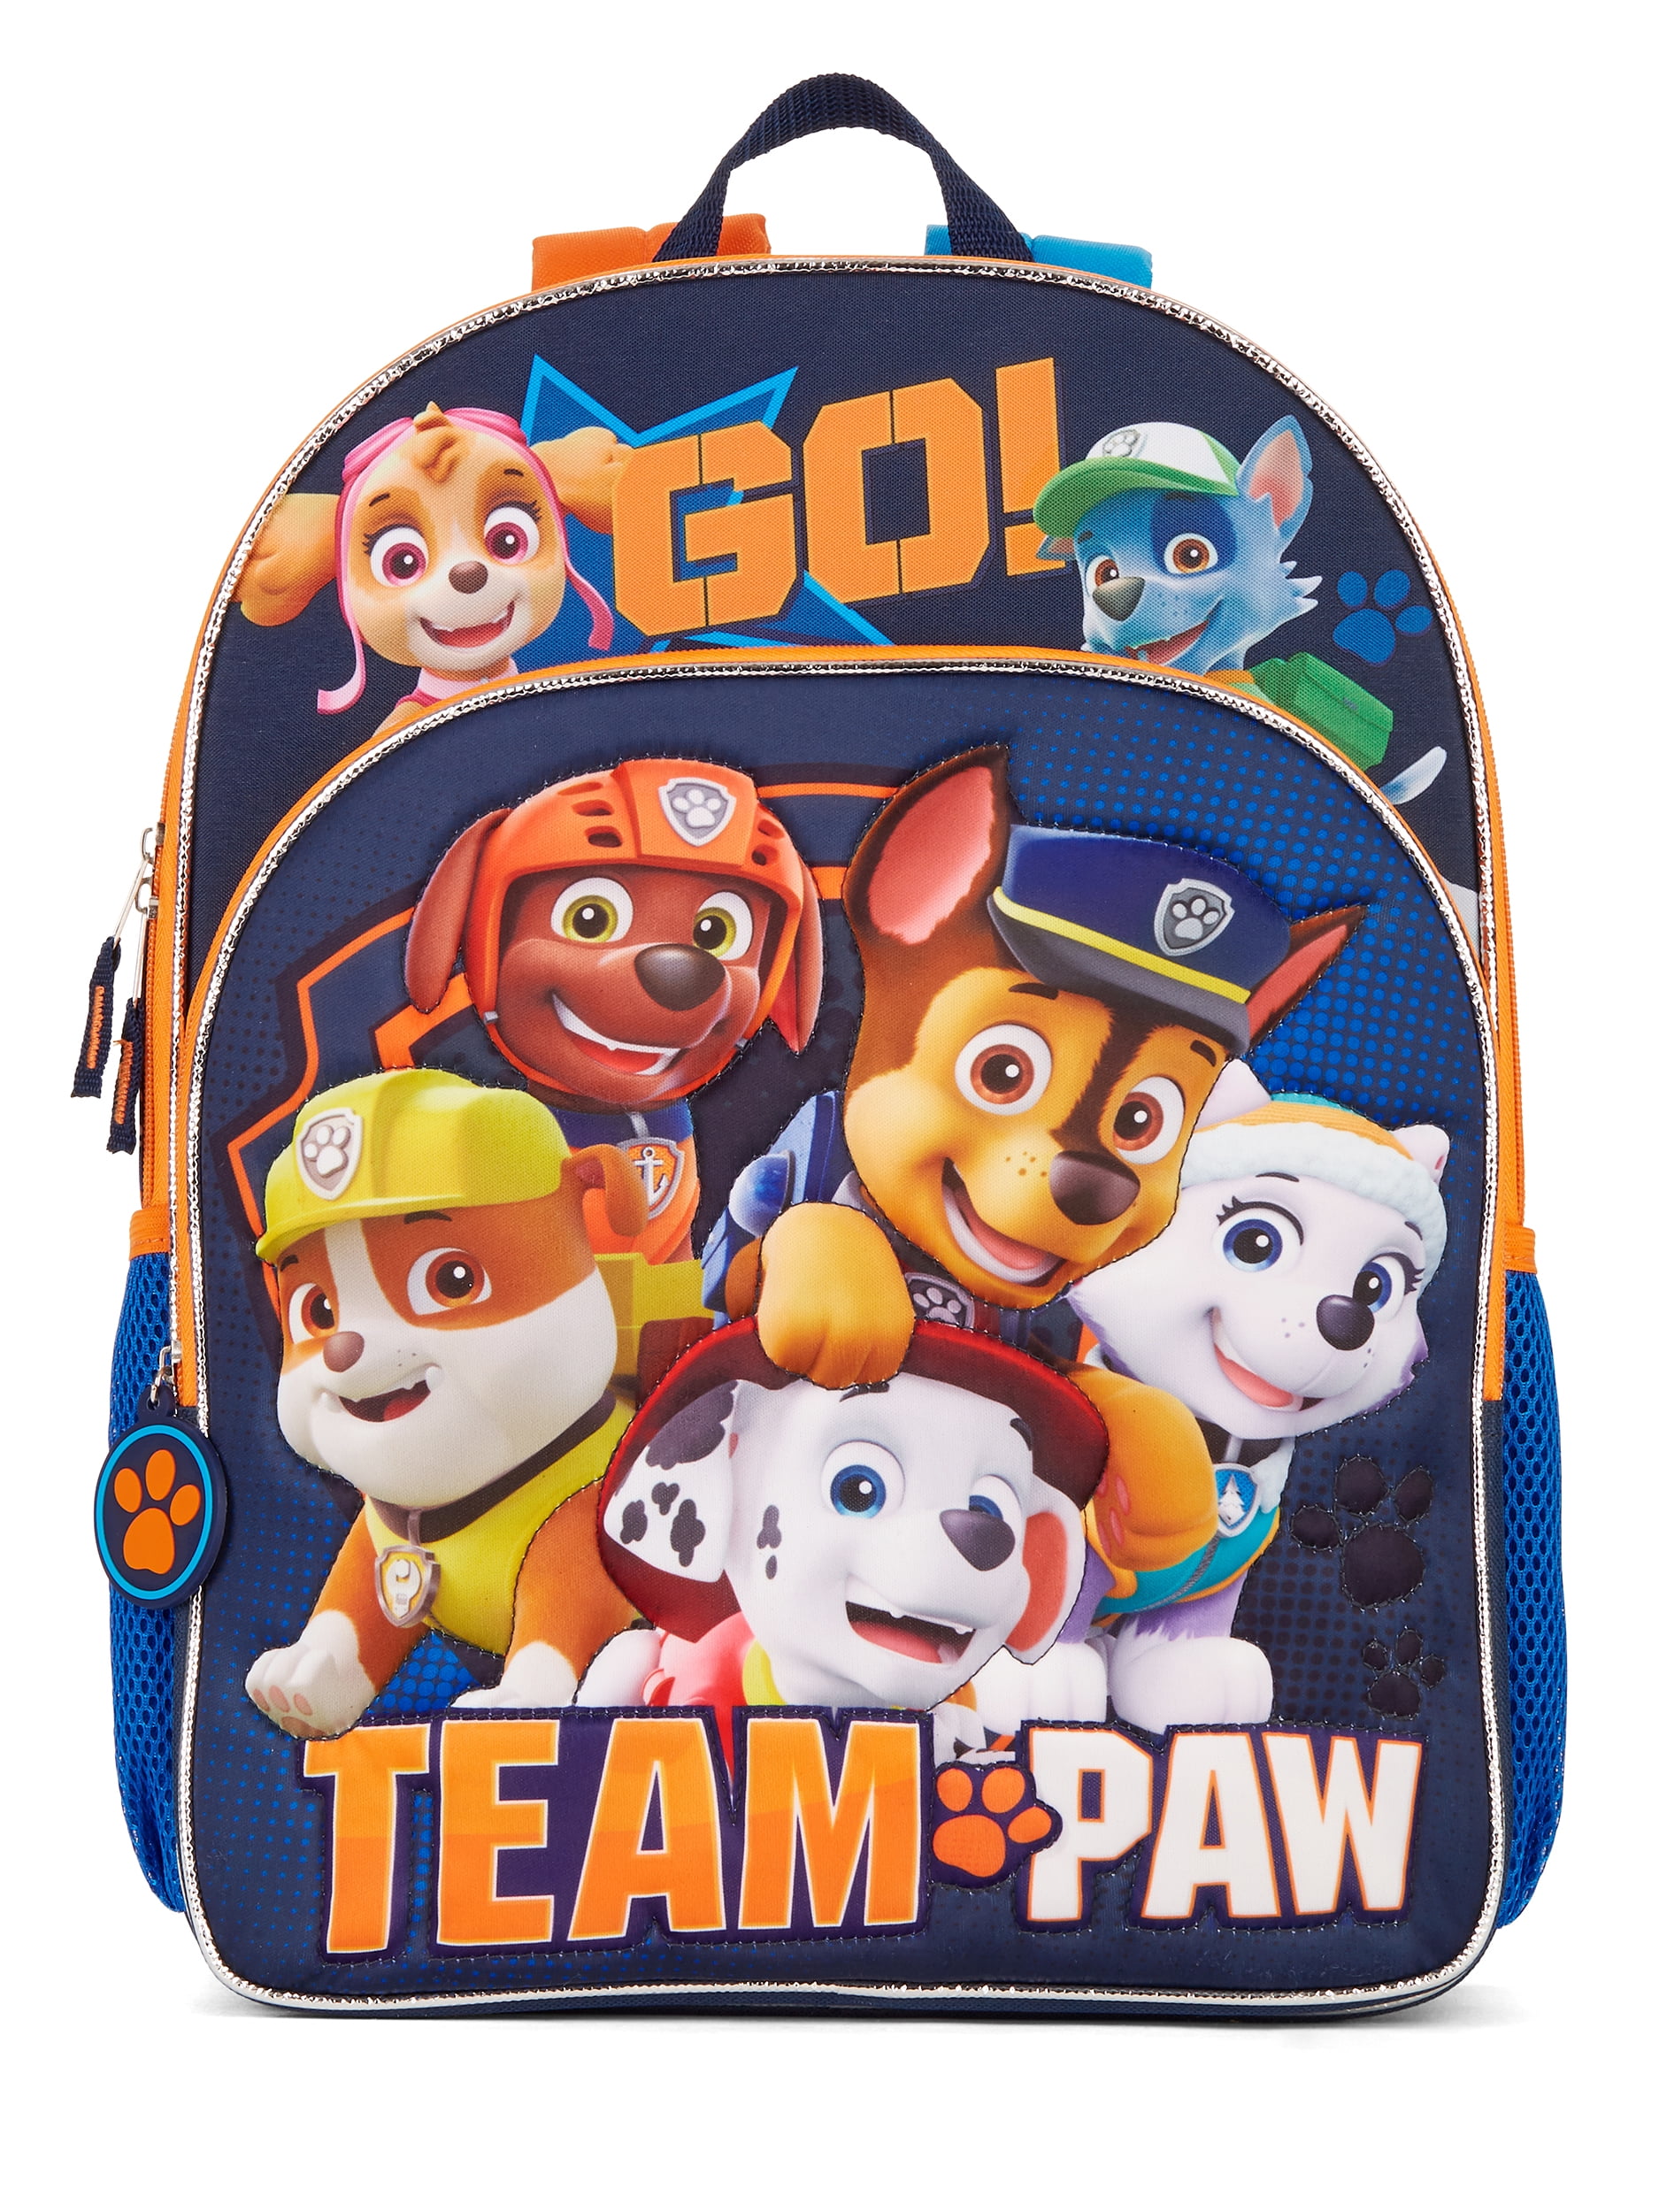 Paw Patrol Boys 3D 16” School Backpack with Padded Adjustable Shoulder Straps with Paw Patrol Characters Print and Multifunction Pockets 